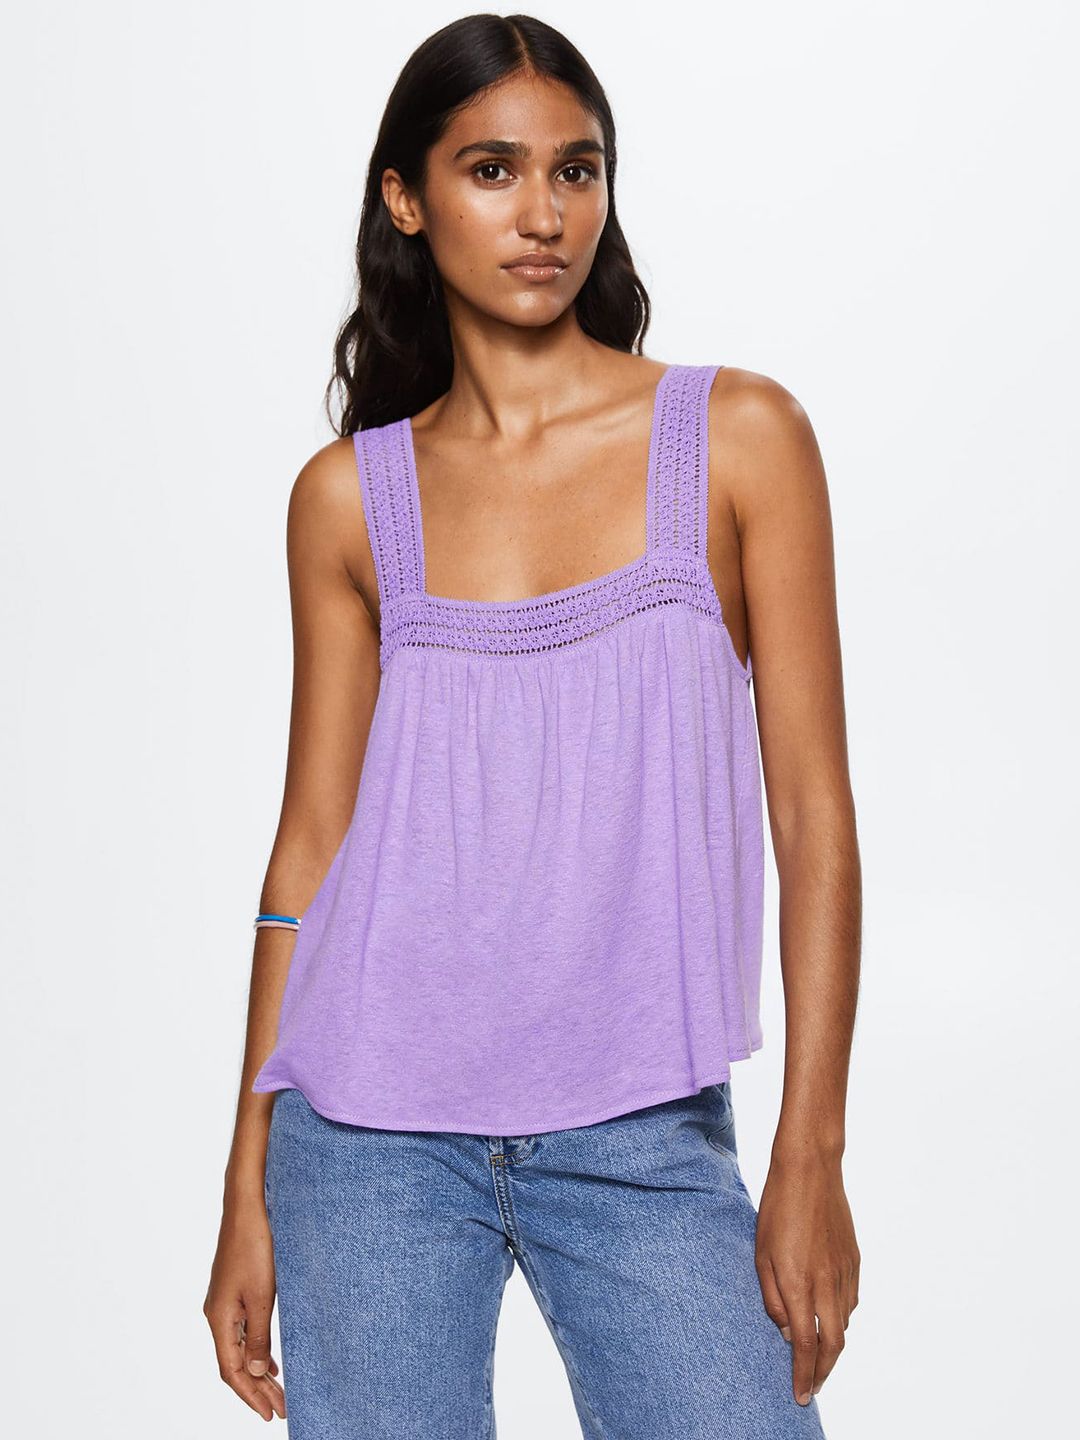 MANGO Lavender Solid Lace Insert Detail Top Price in India